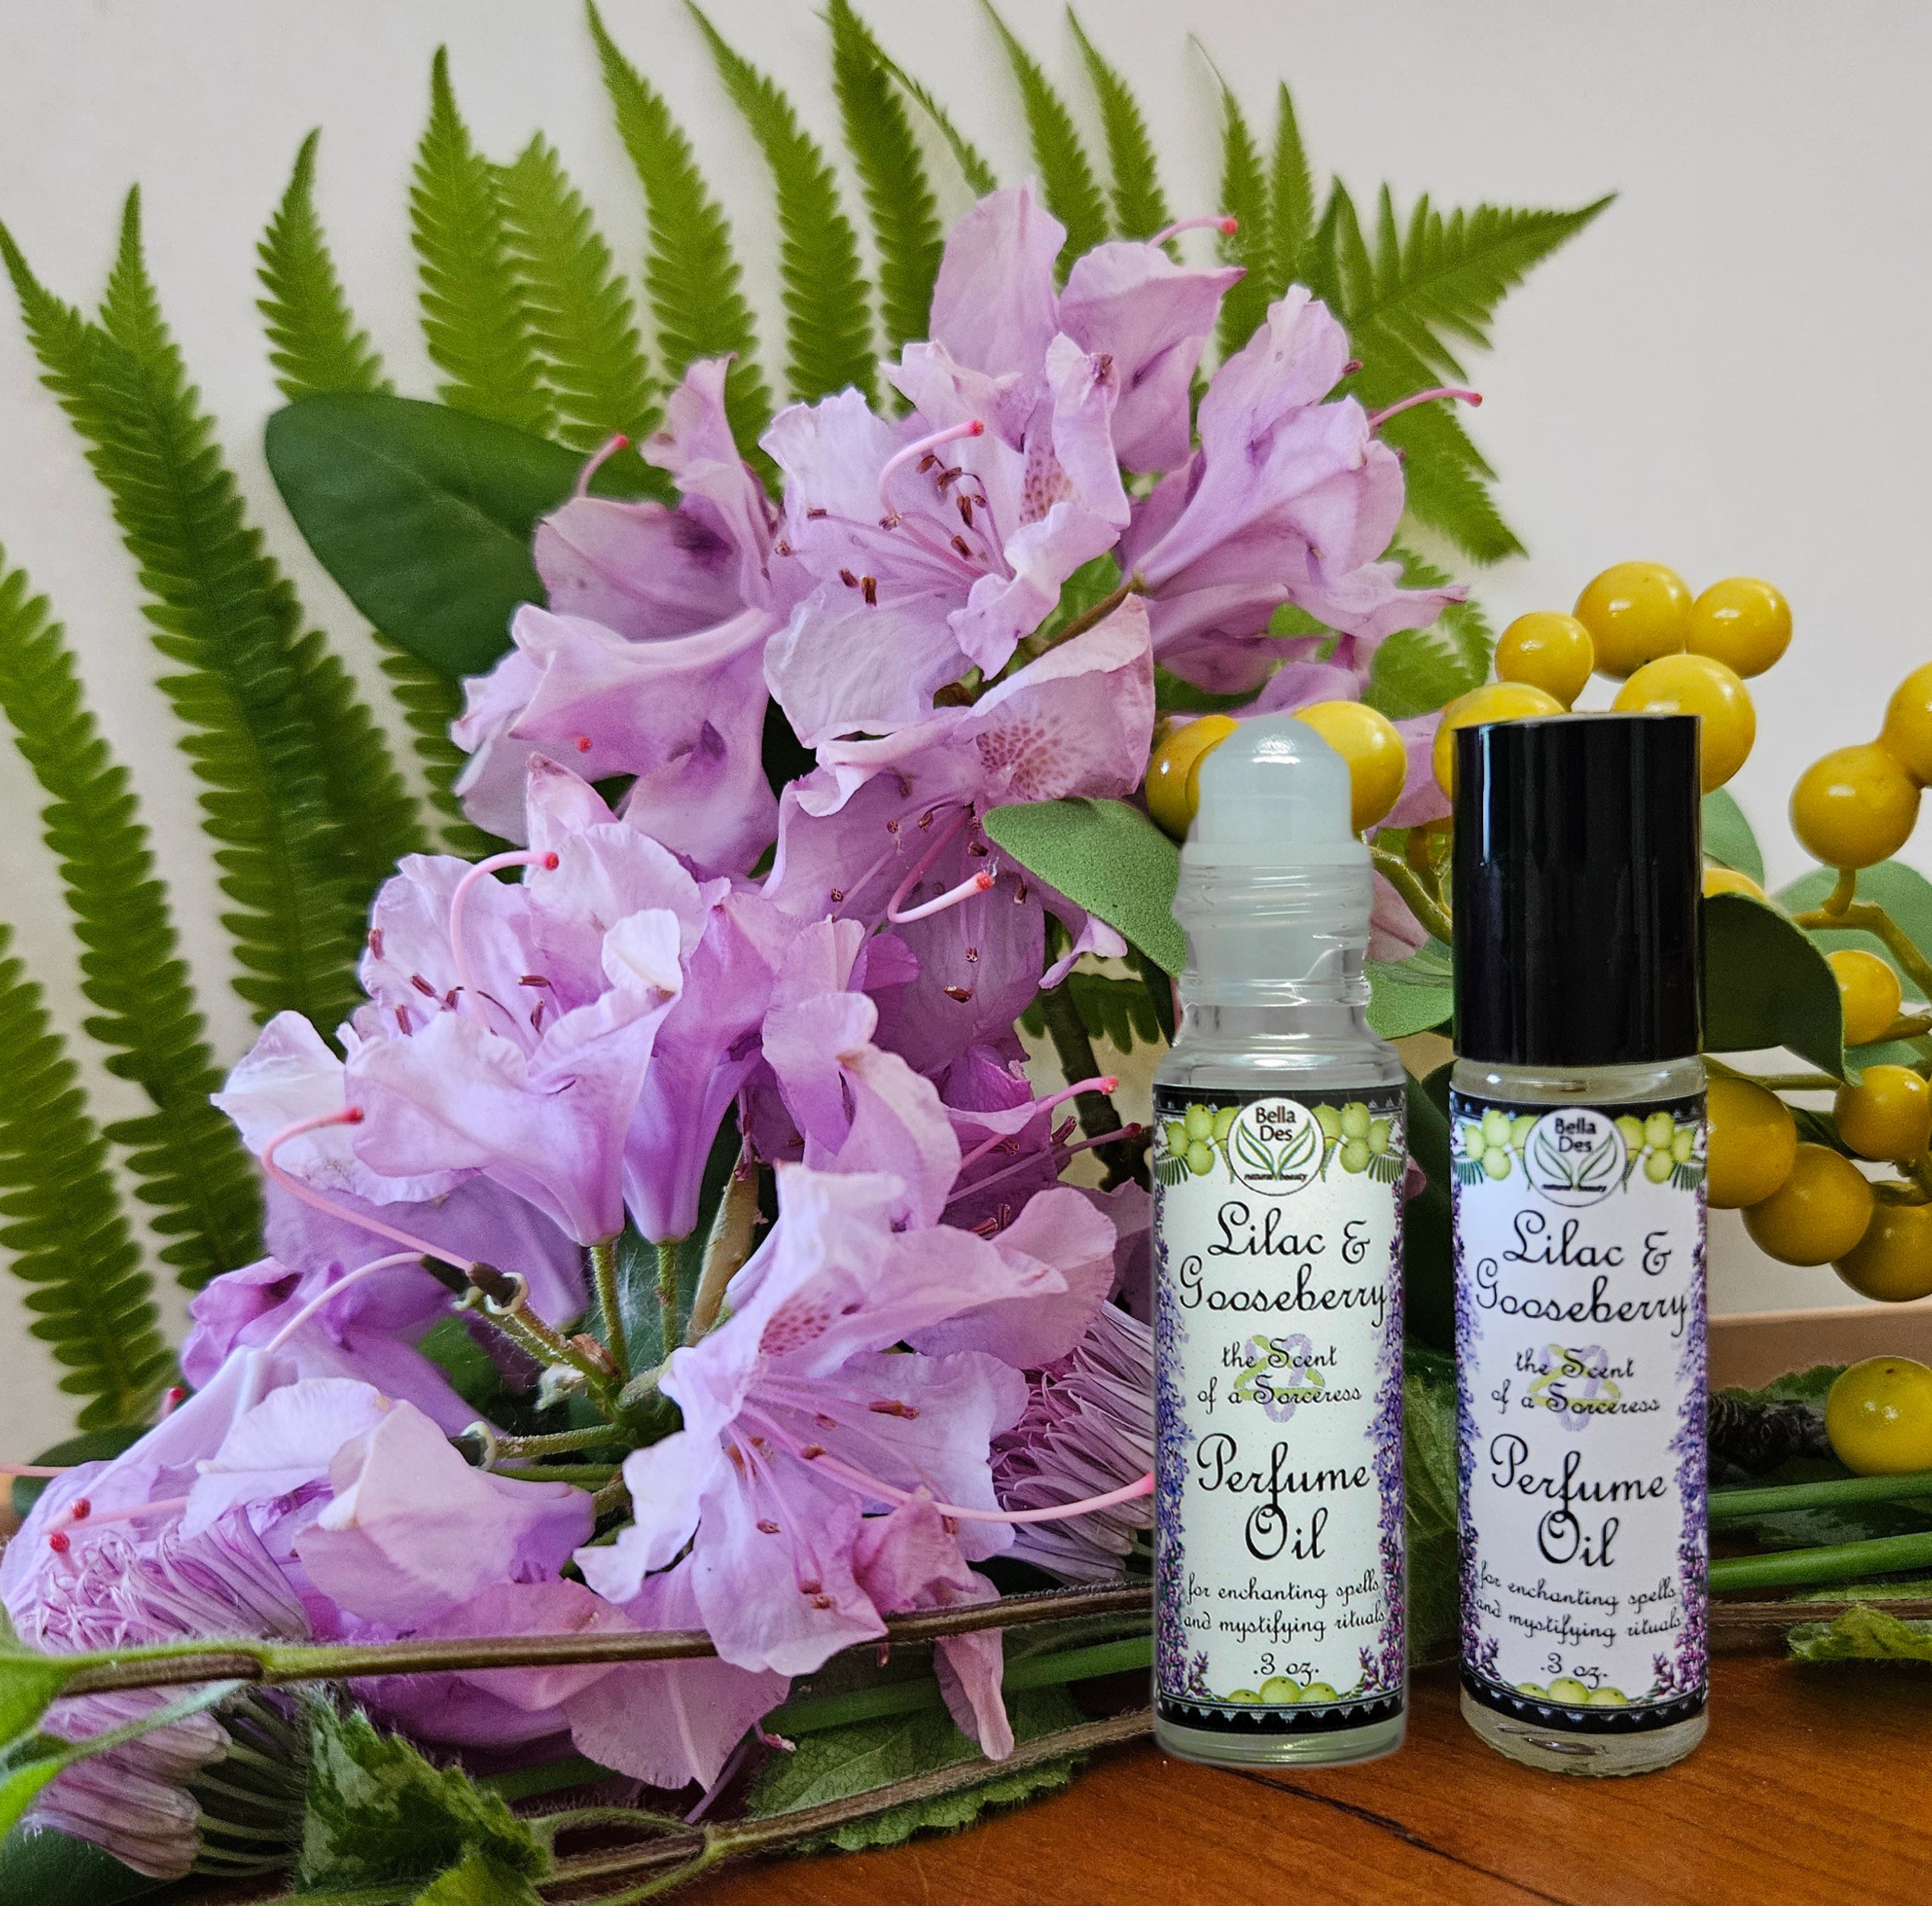 Lilac & Lilies Fragrance Oil